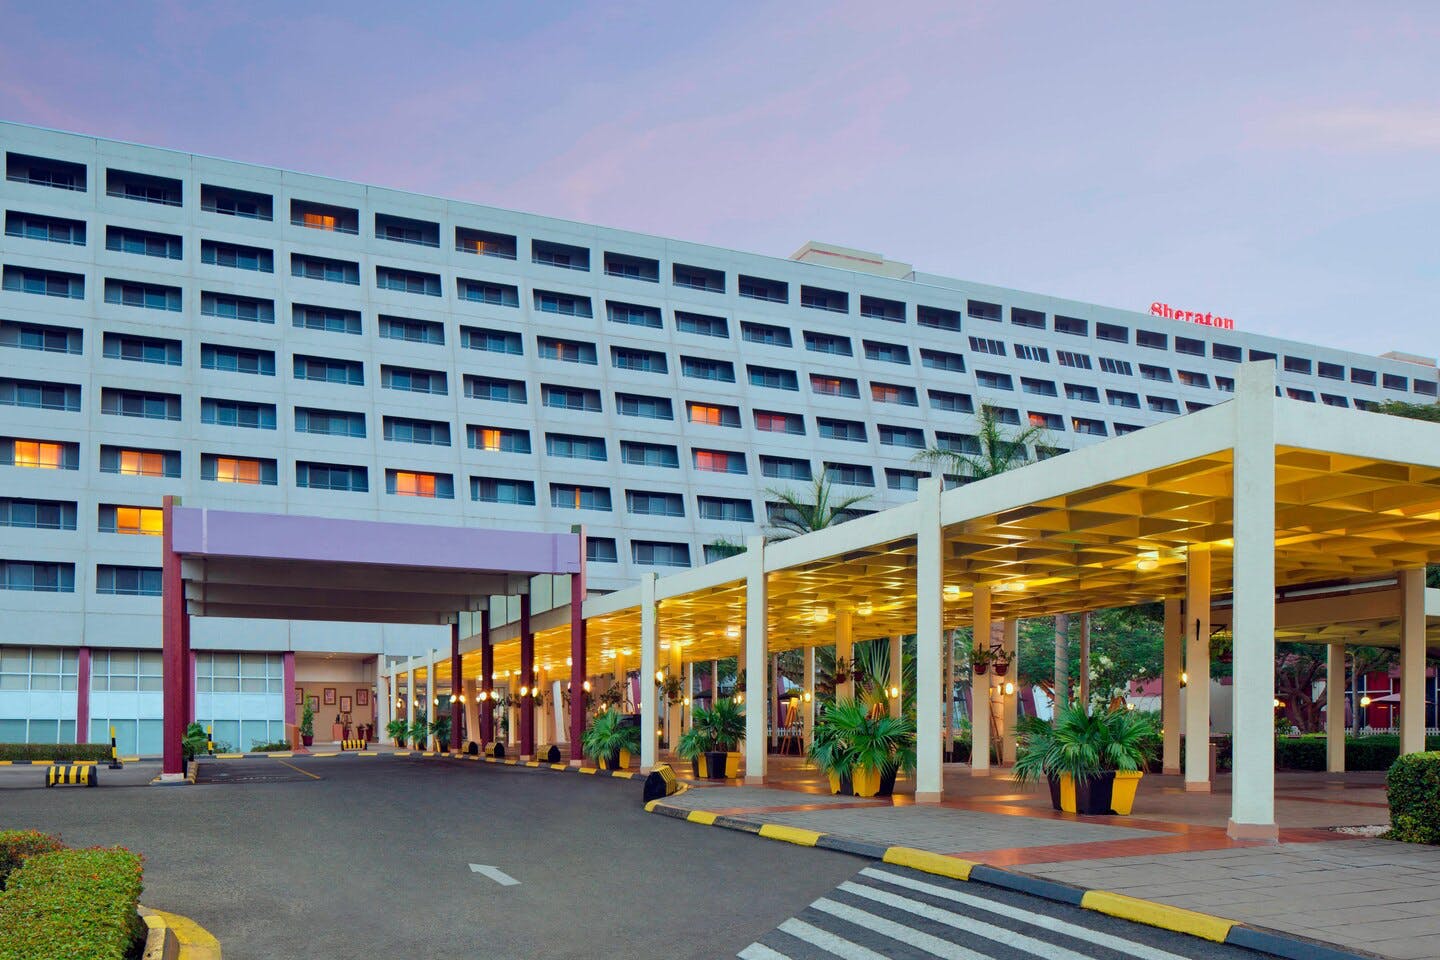 Sheraton Hotel Abuja is one of the branches of the hotel with one located in Lagos